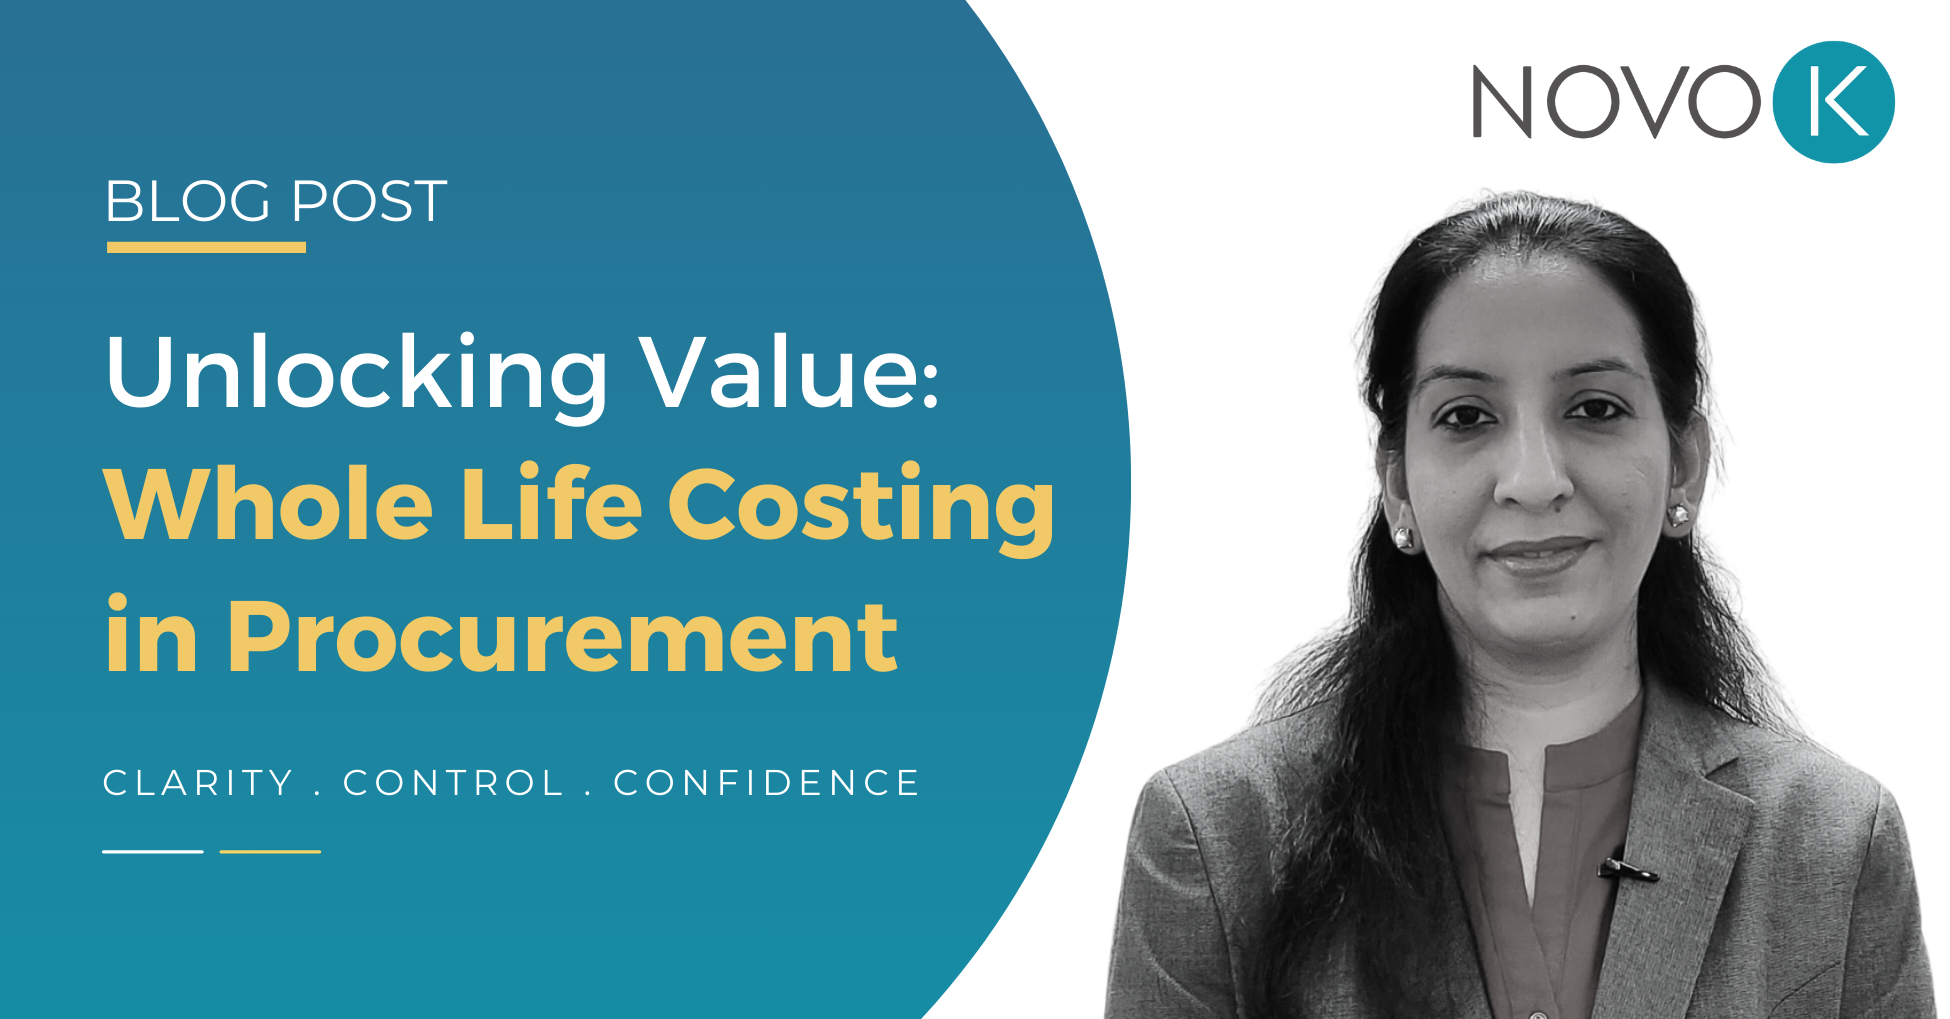 Unlocking Value: Whole Life Costing in Procurement